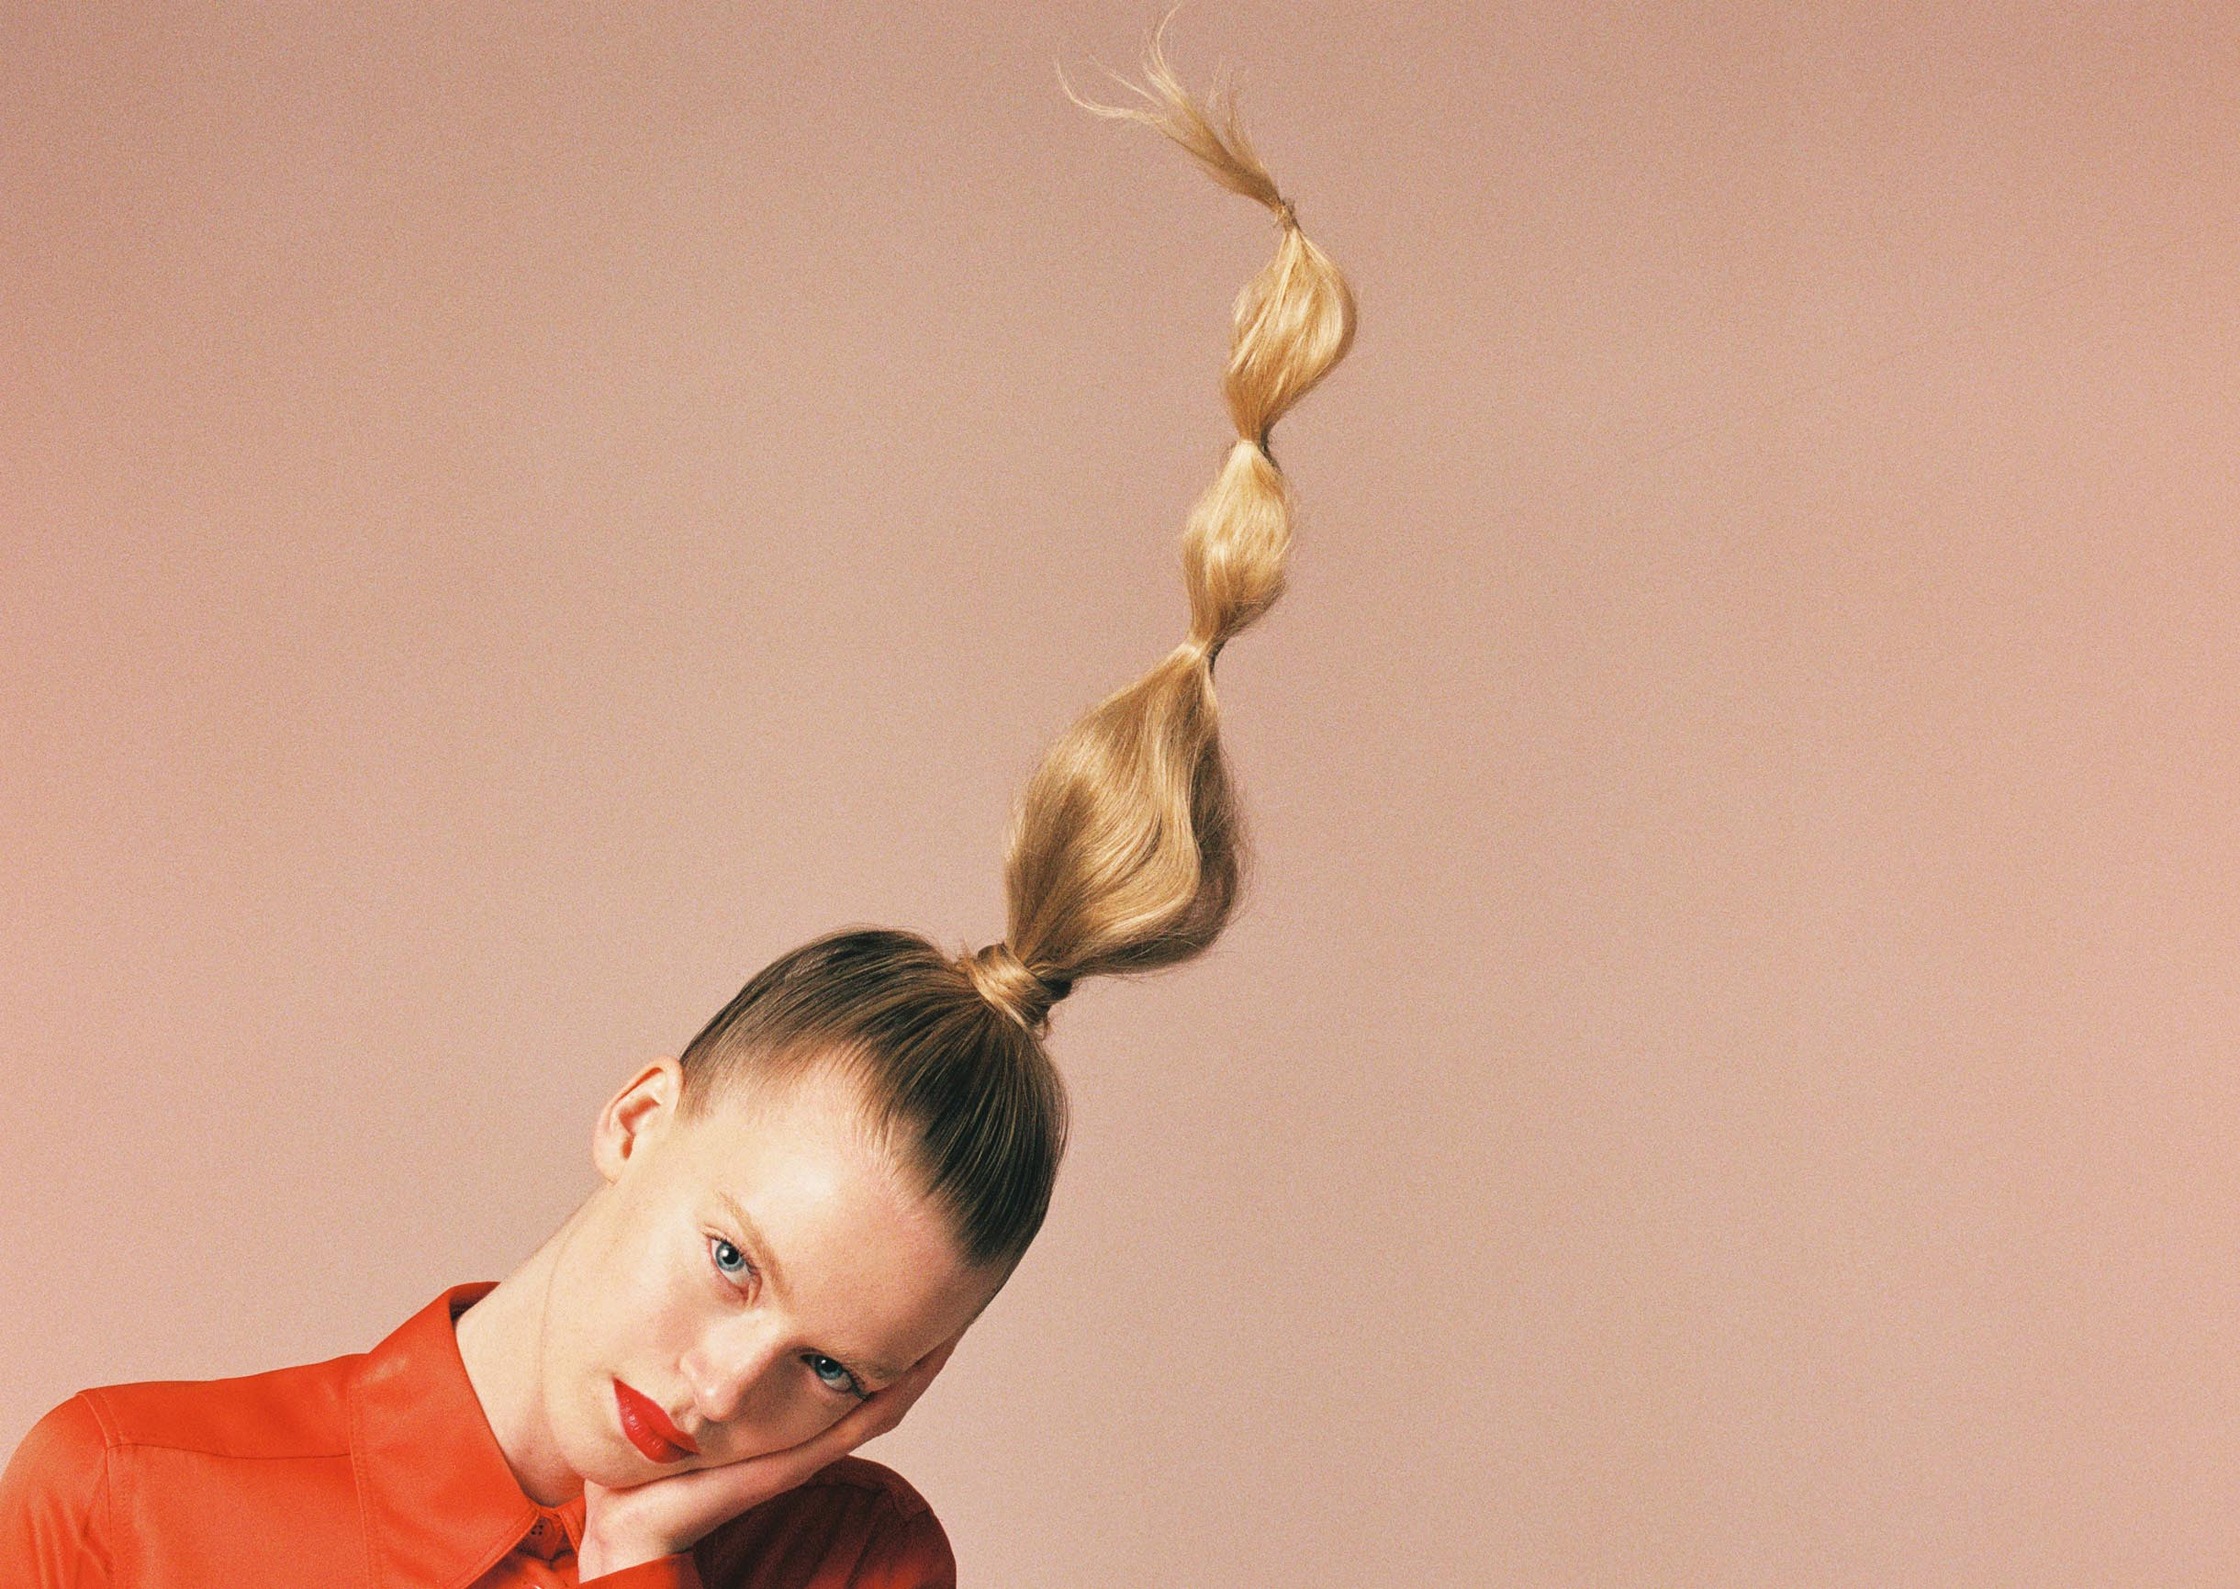 a woman with her hair up in a ponytail fashion photographer Fraukle Fischer